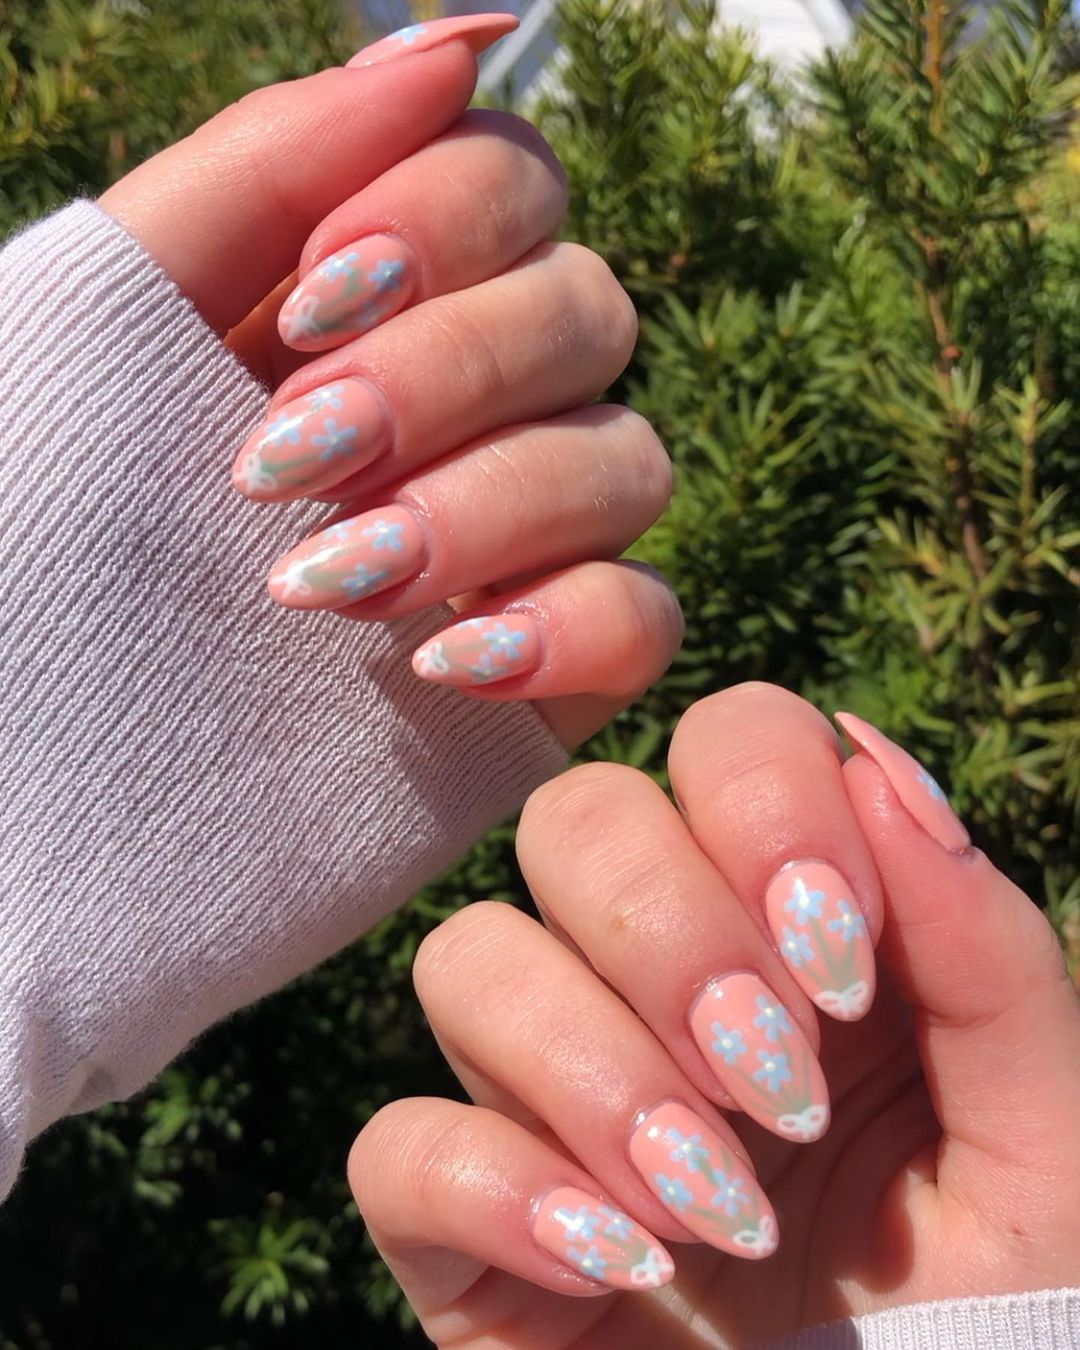 Nails by Sue - West Bromwich - Summer time means lots of flower designs.  Pink BIAB nails with freehand flower nail art. #summernails #pinknails  #classicnails #westbromwichnails #birminghamnails #freehandflowernails  #flowernails #flowernailsart ...